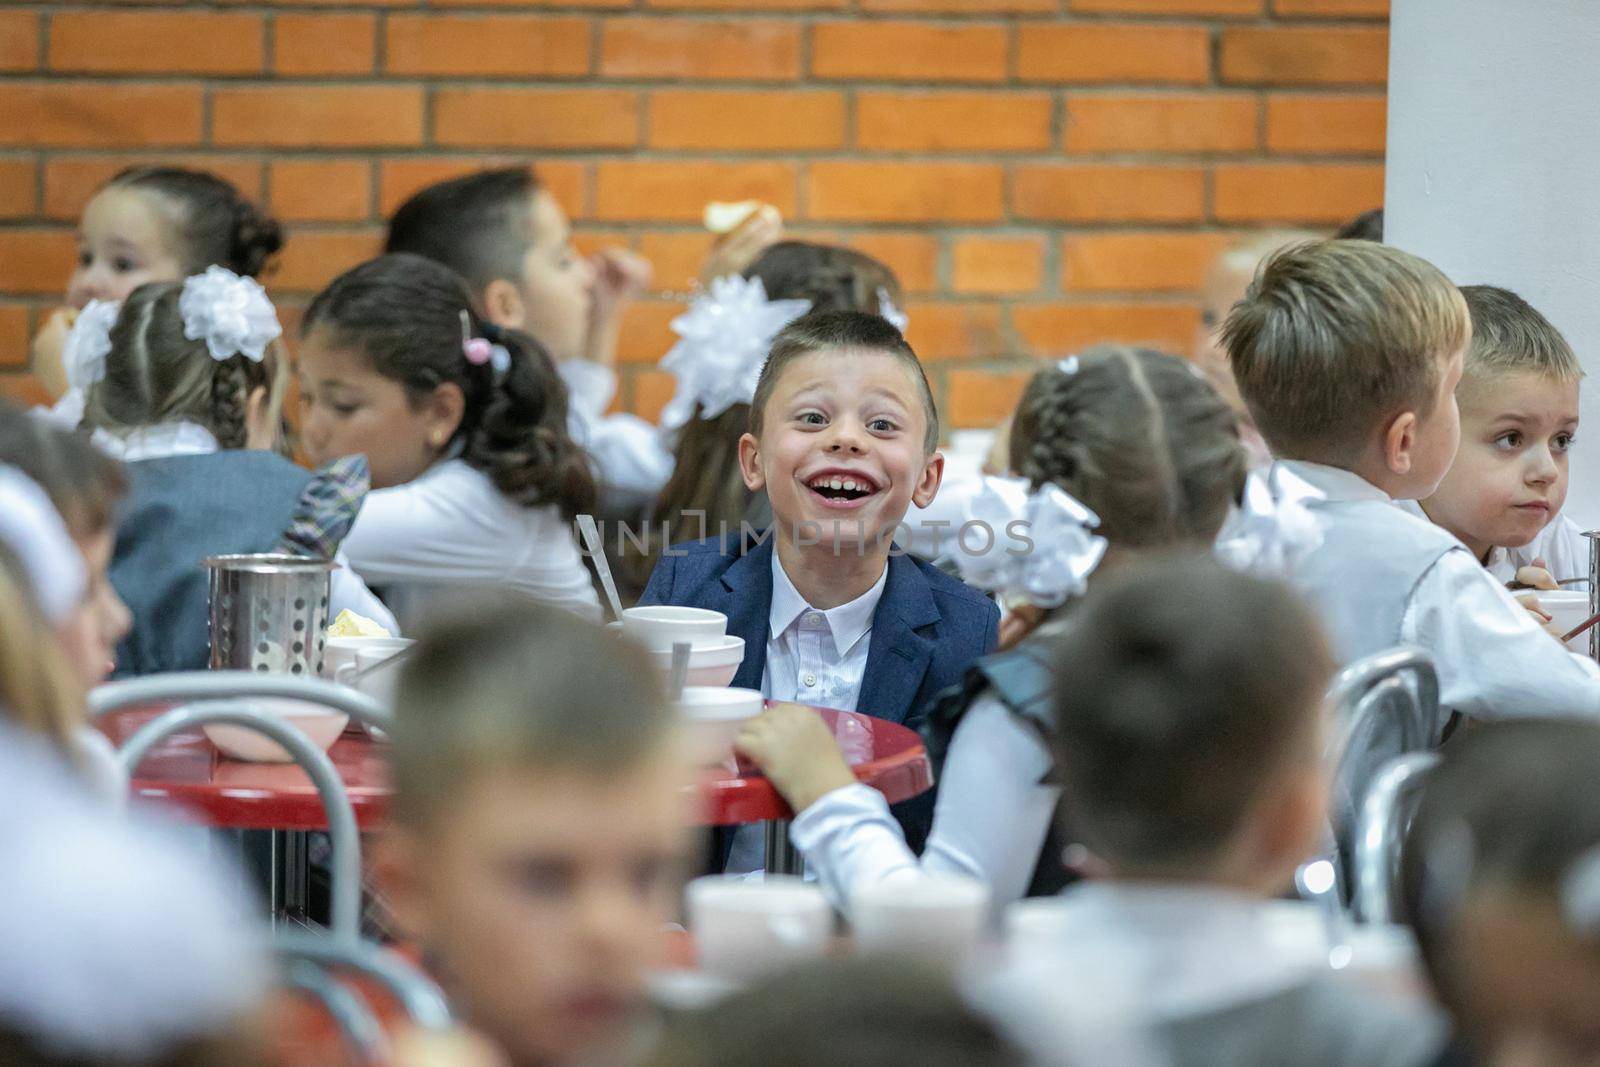 First graders eat in the school cafeteria. Lunch in the dining room on September 1st. Moscow, Russia, September 2, 2019